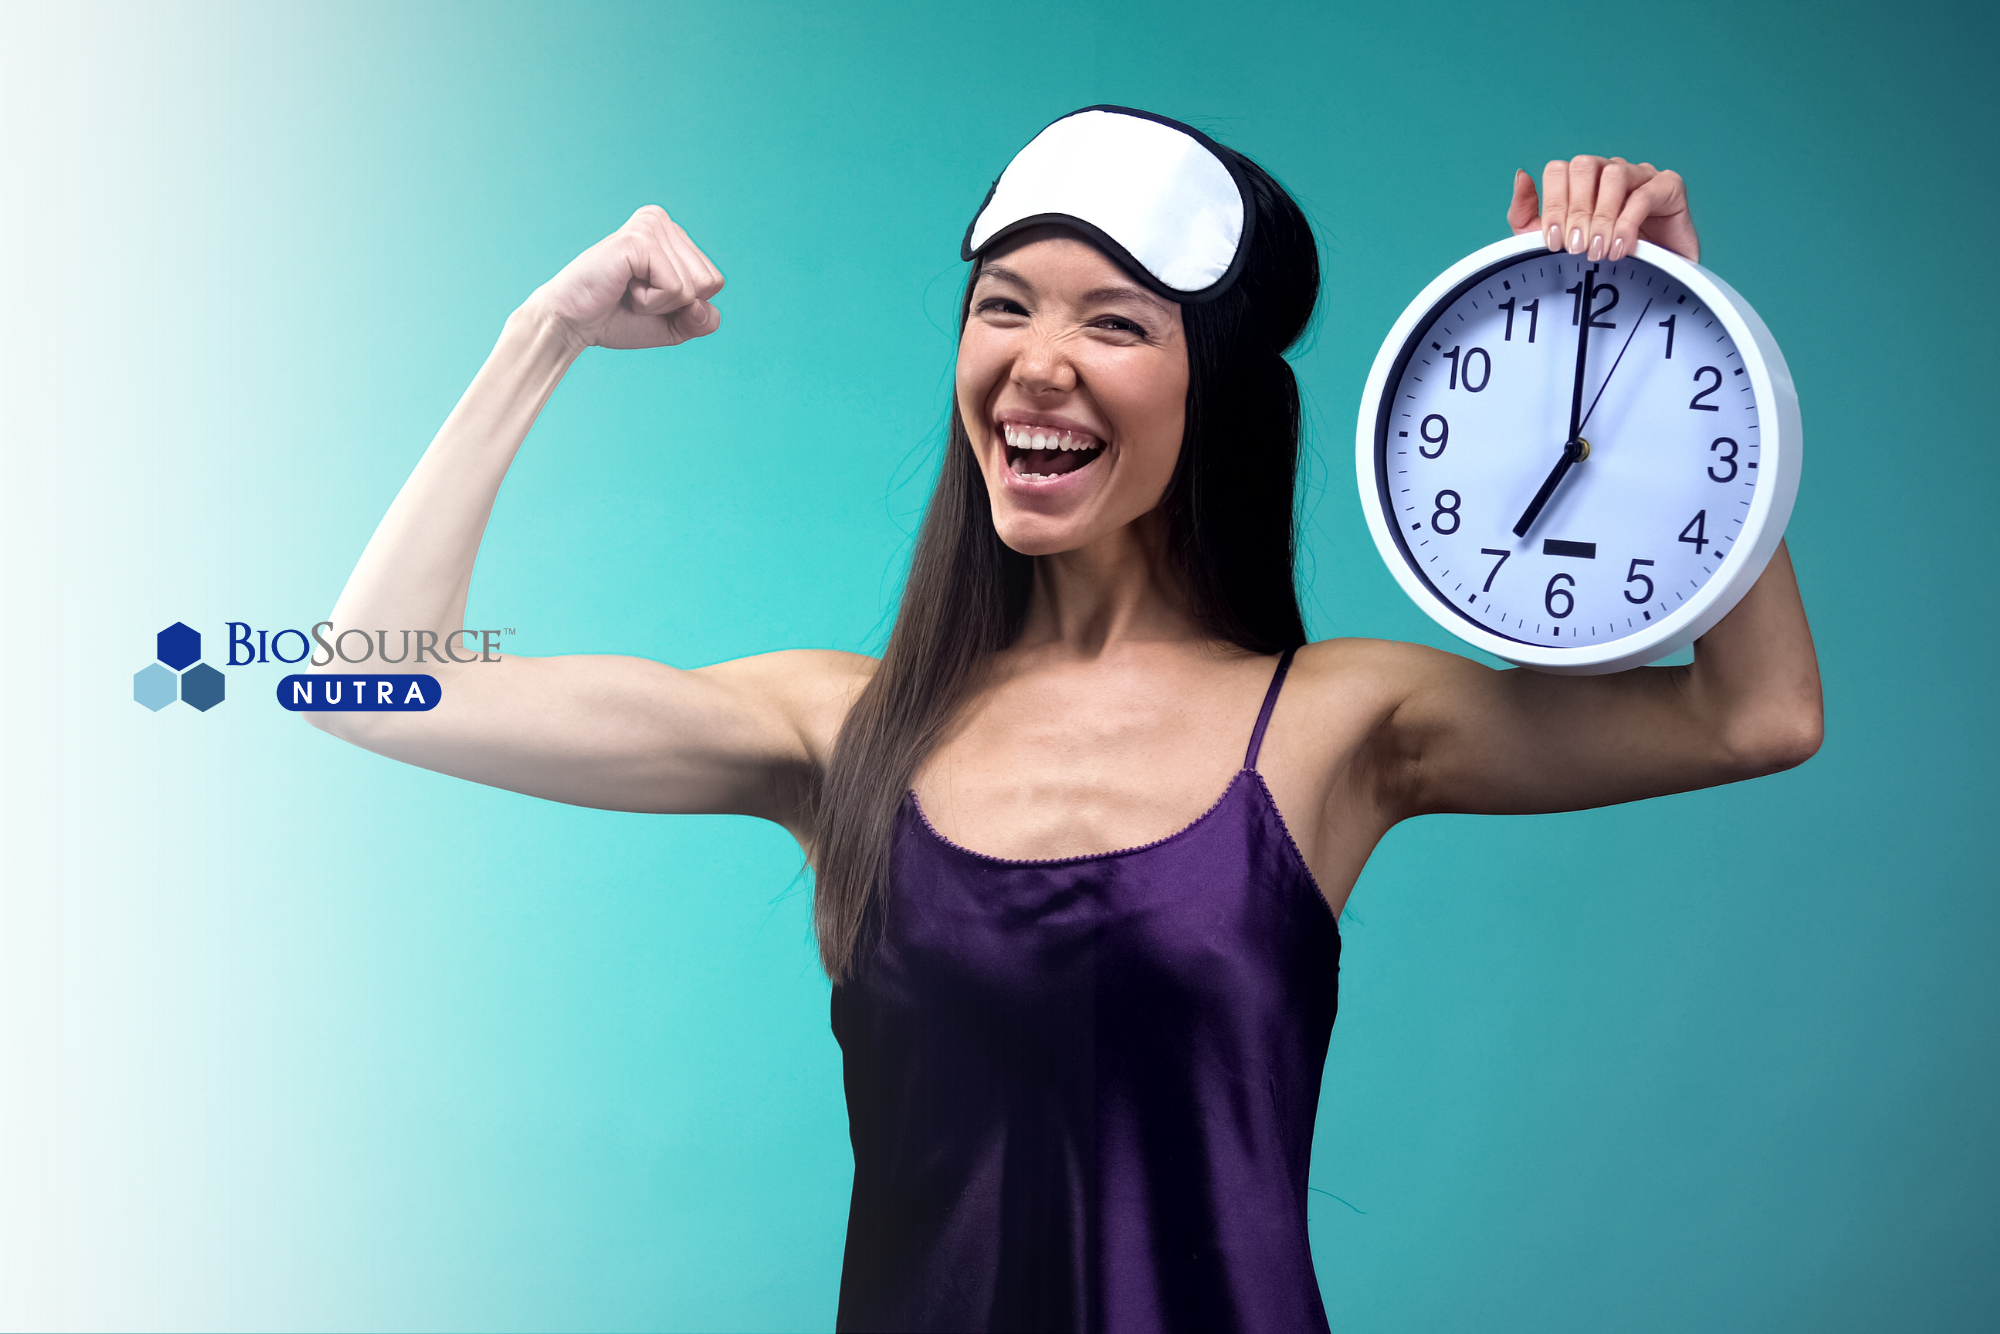 A young woman flexes her muscles as she holds a clock